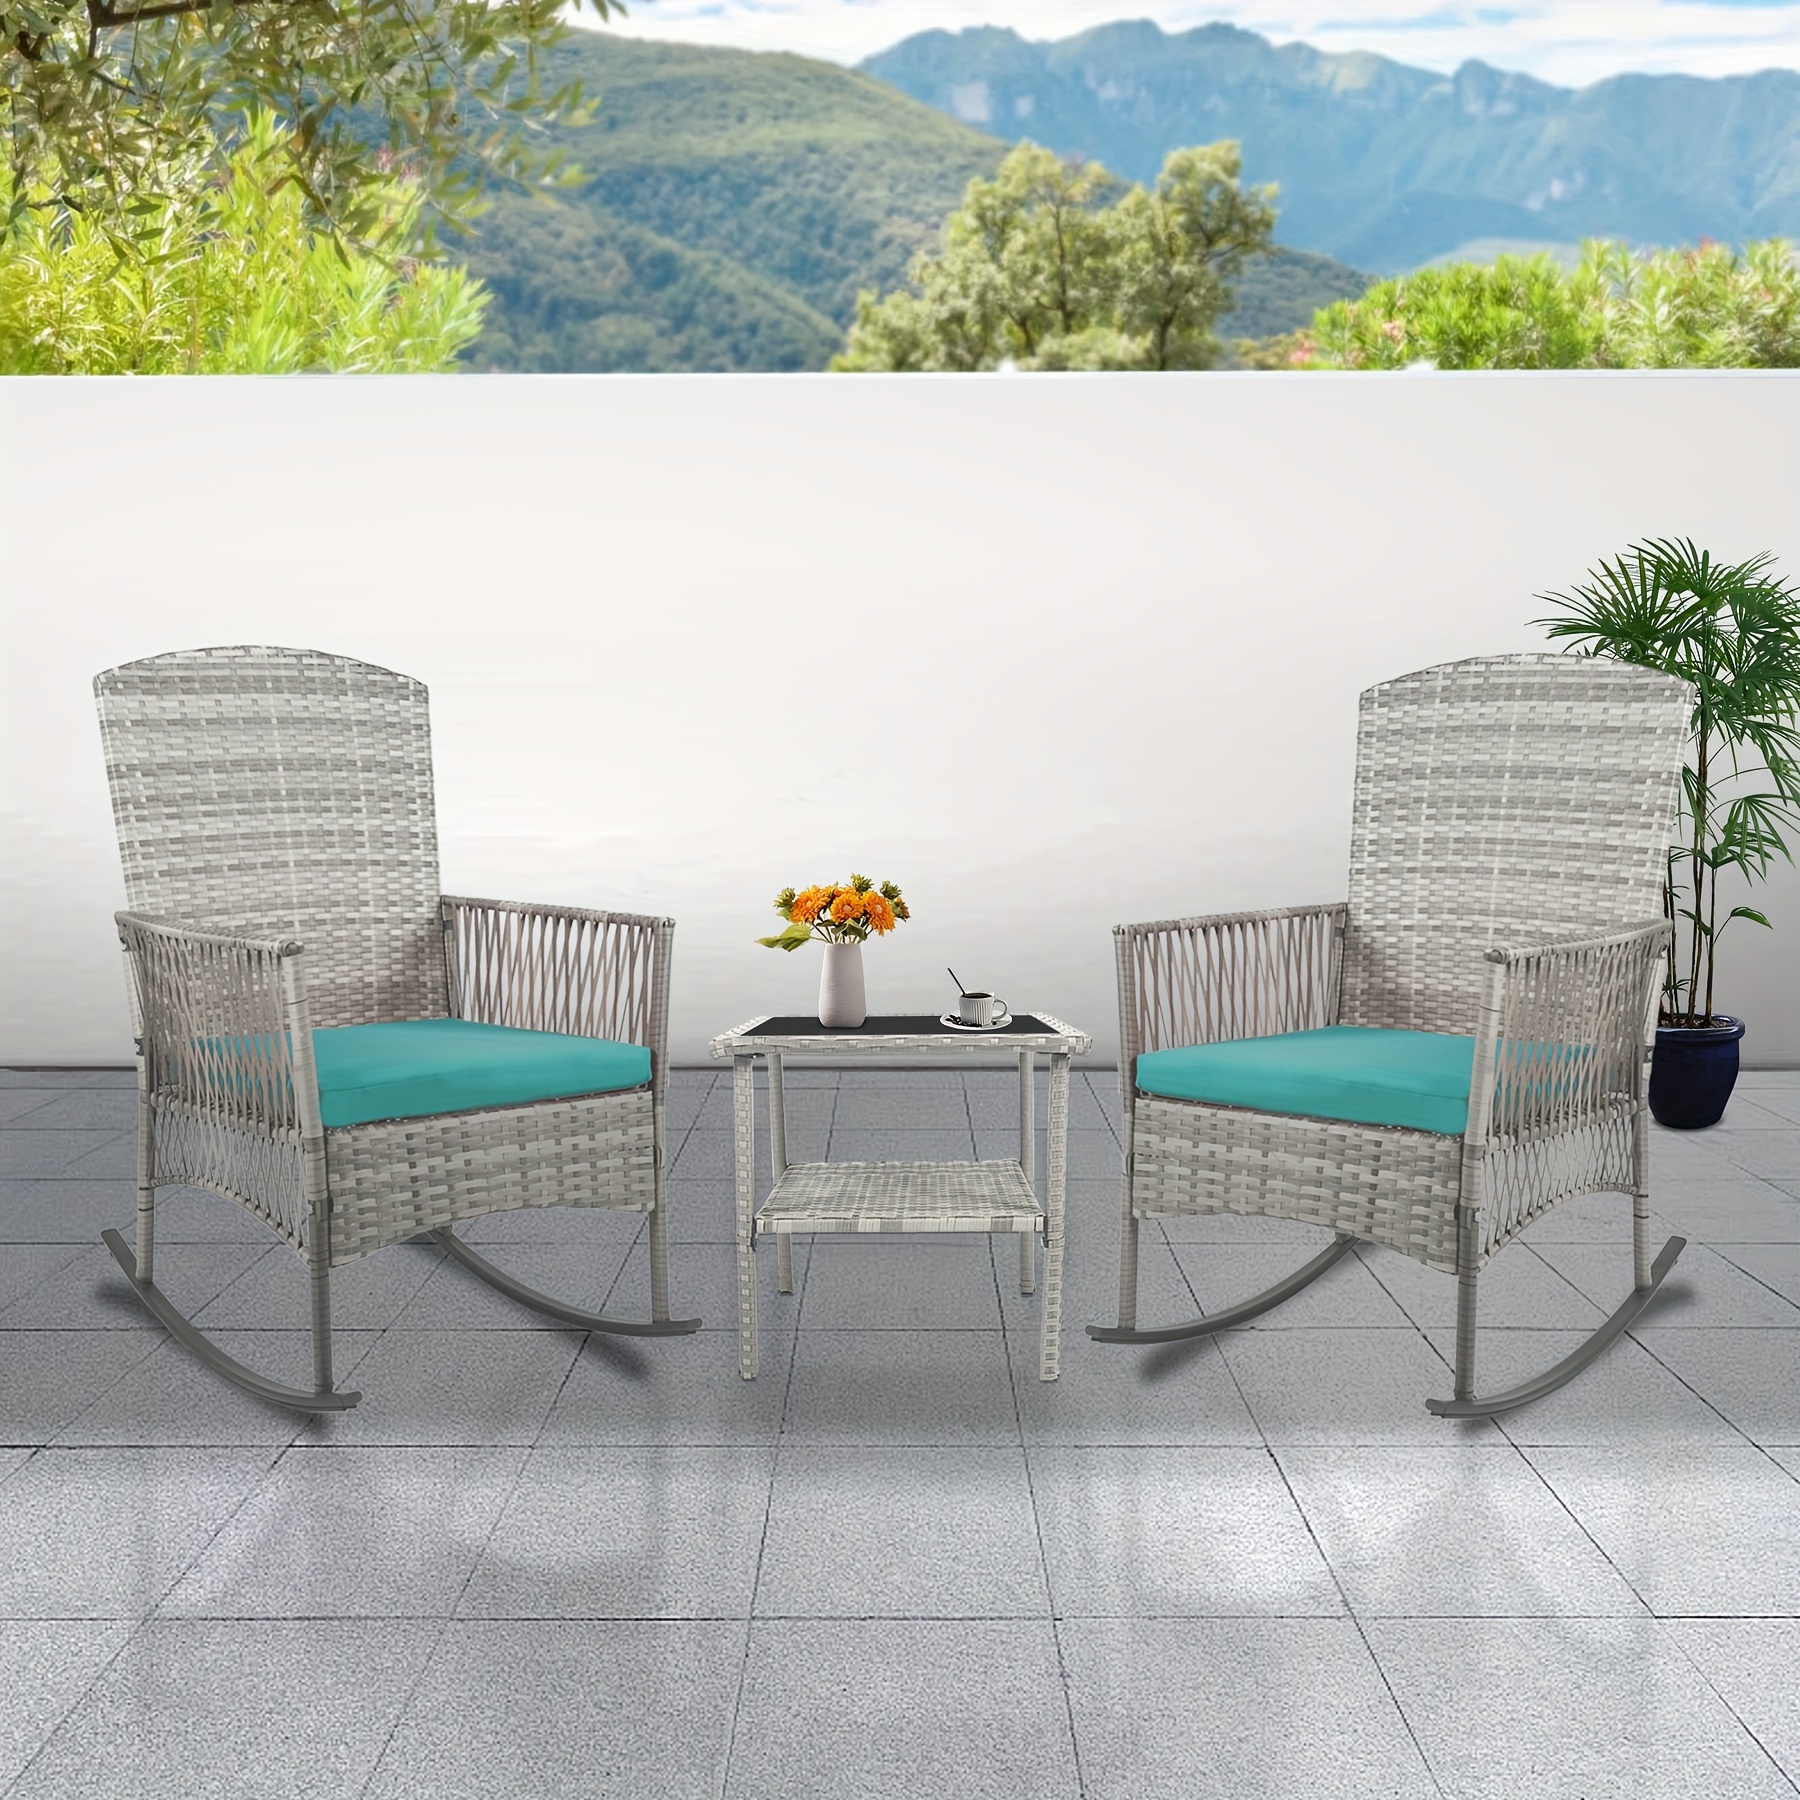 

Outdoor Wicker Rocking Chair Set, 3 Pieces Patio Conversation Furniture Bistro Set With Glass Top Coffee Table And Cushions For Garden Porch And Balcony